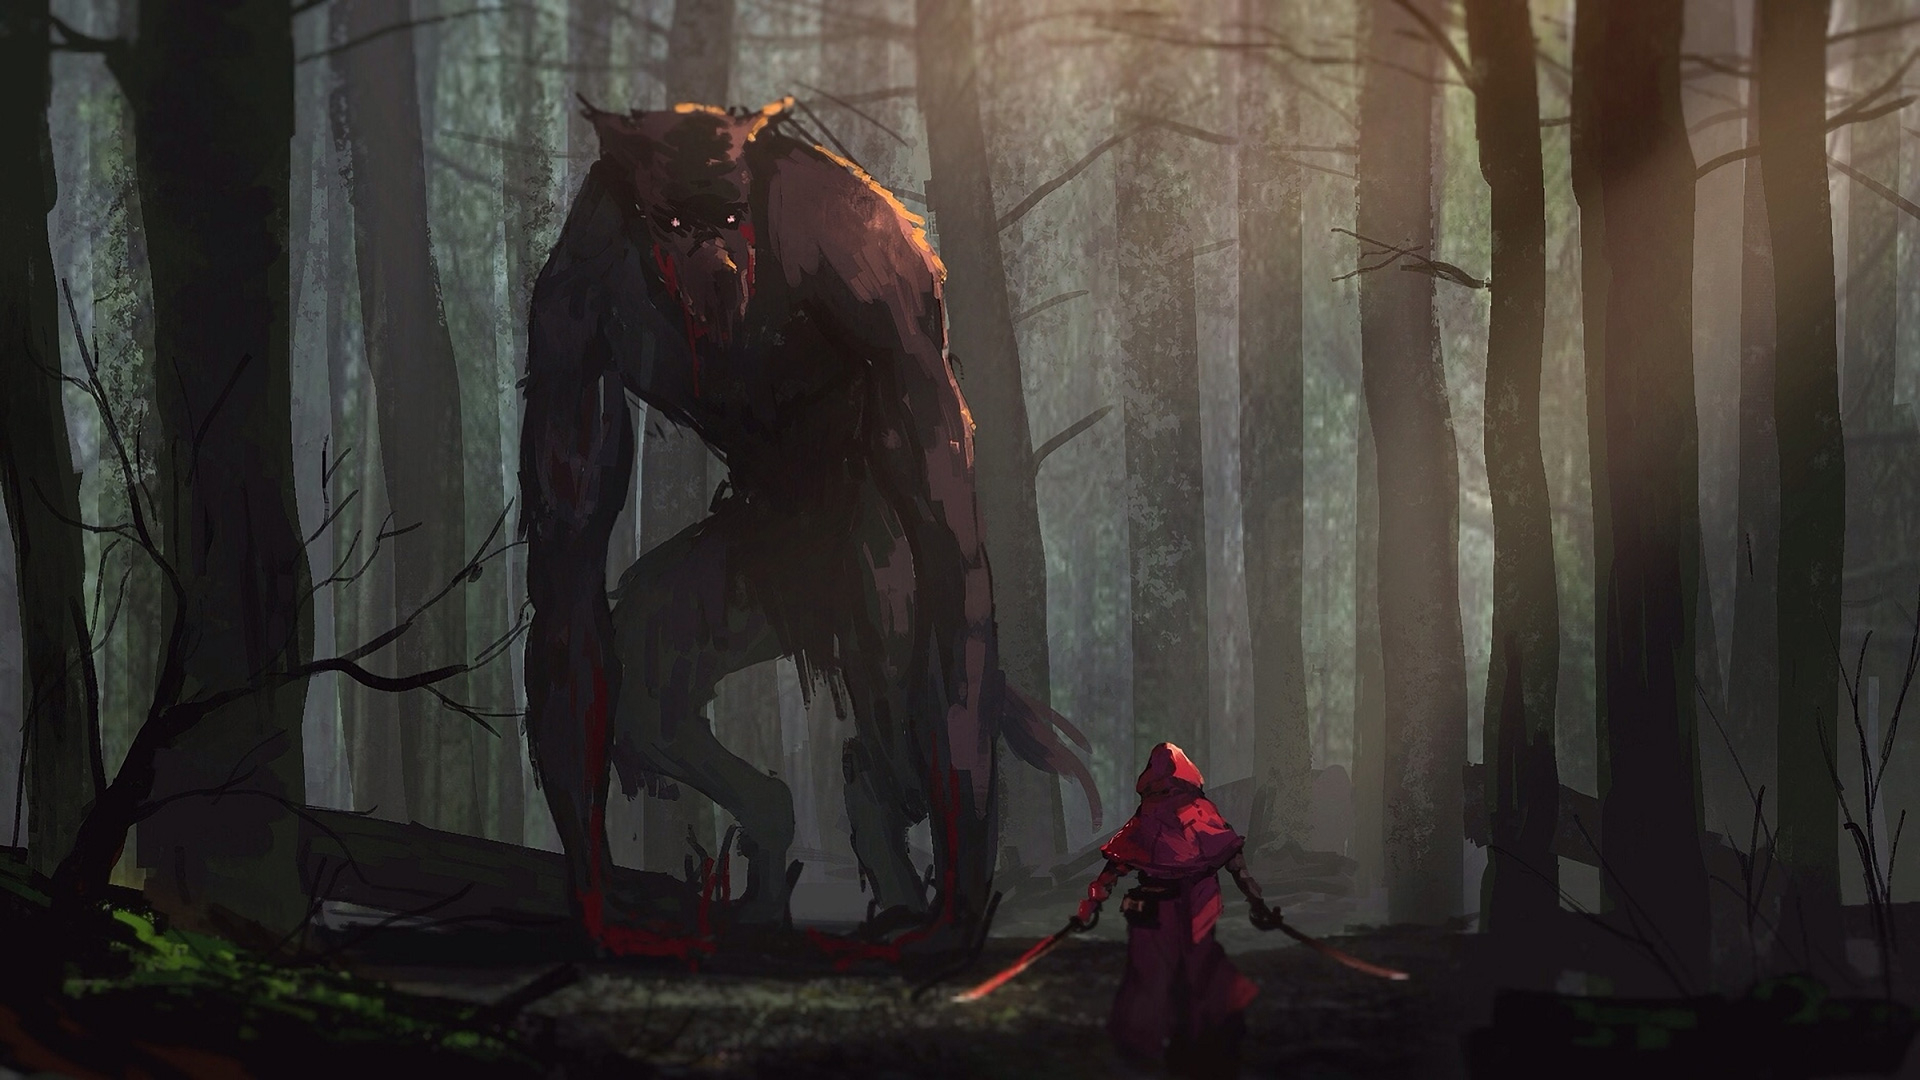 1920x1080 Little Red Riding Hood Vs Werewolves Fairy Tale Artwork, HD Artist, 4k Wallpapers, Images, Backgrounds, Photos and Pictures